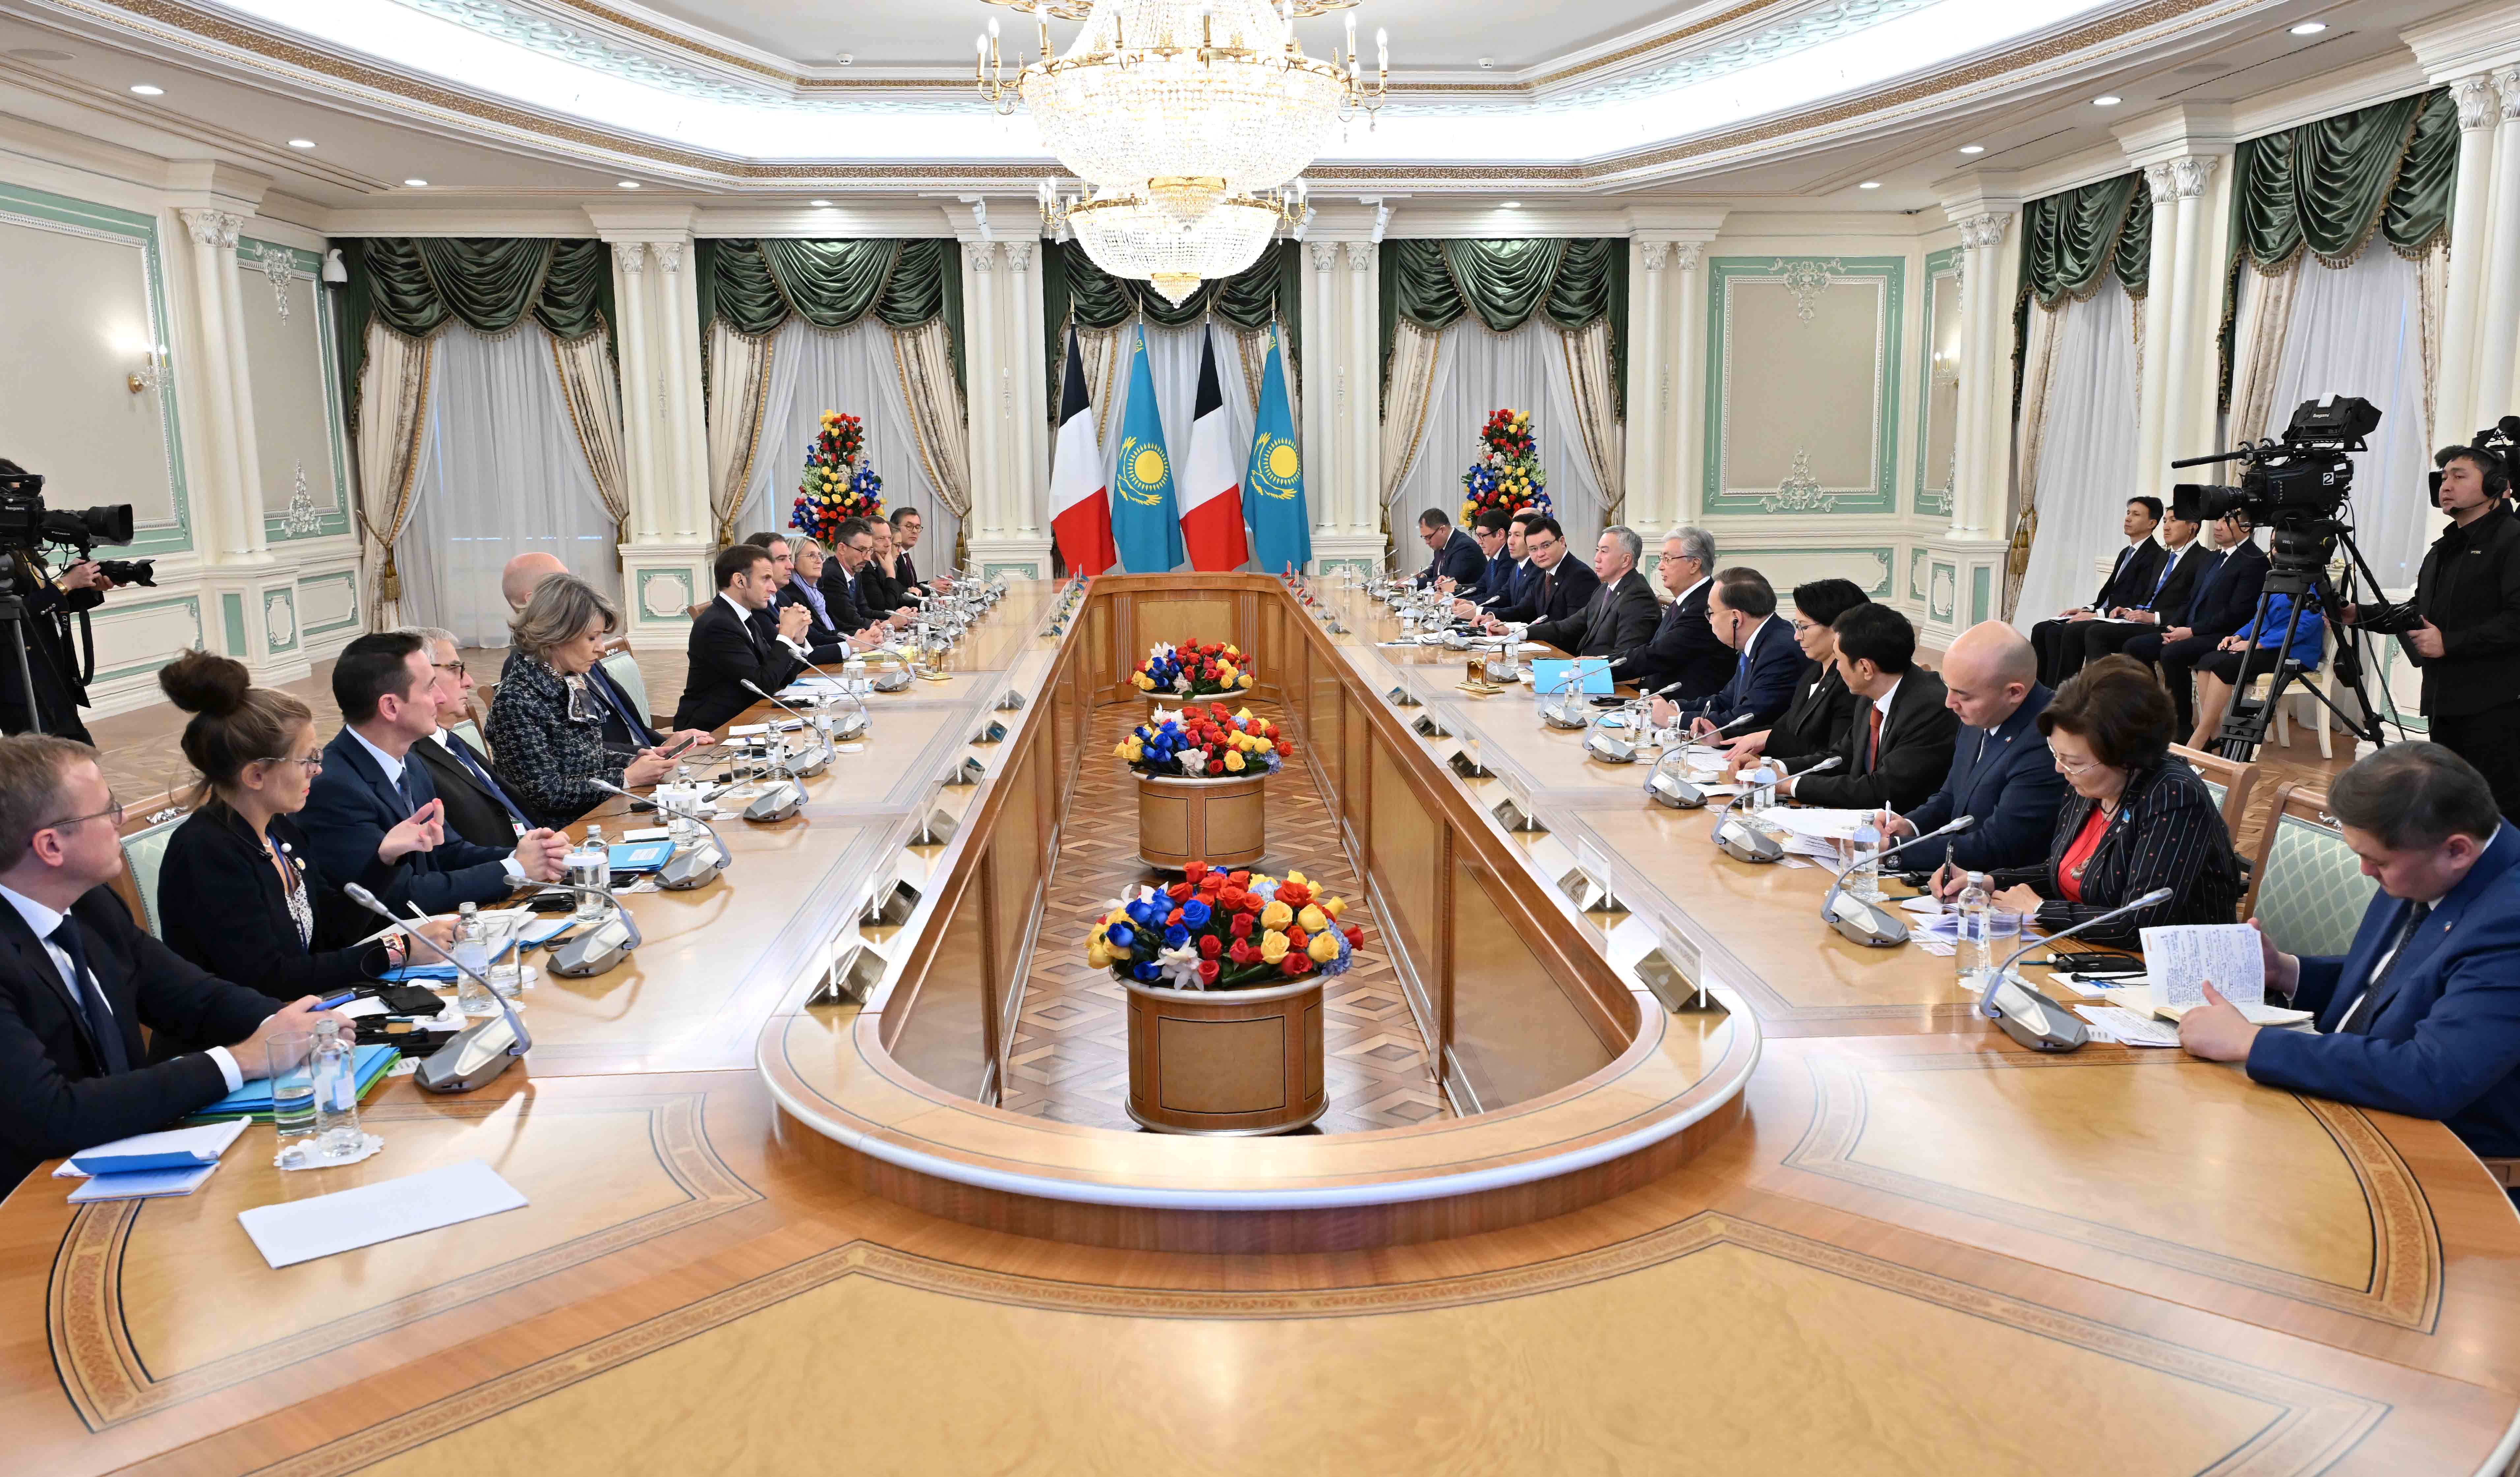 Kazakhstan and France boost bilateral ties: $18.7bn in investments and 30% trade growth 